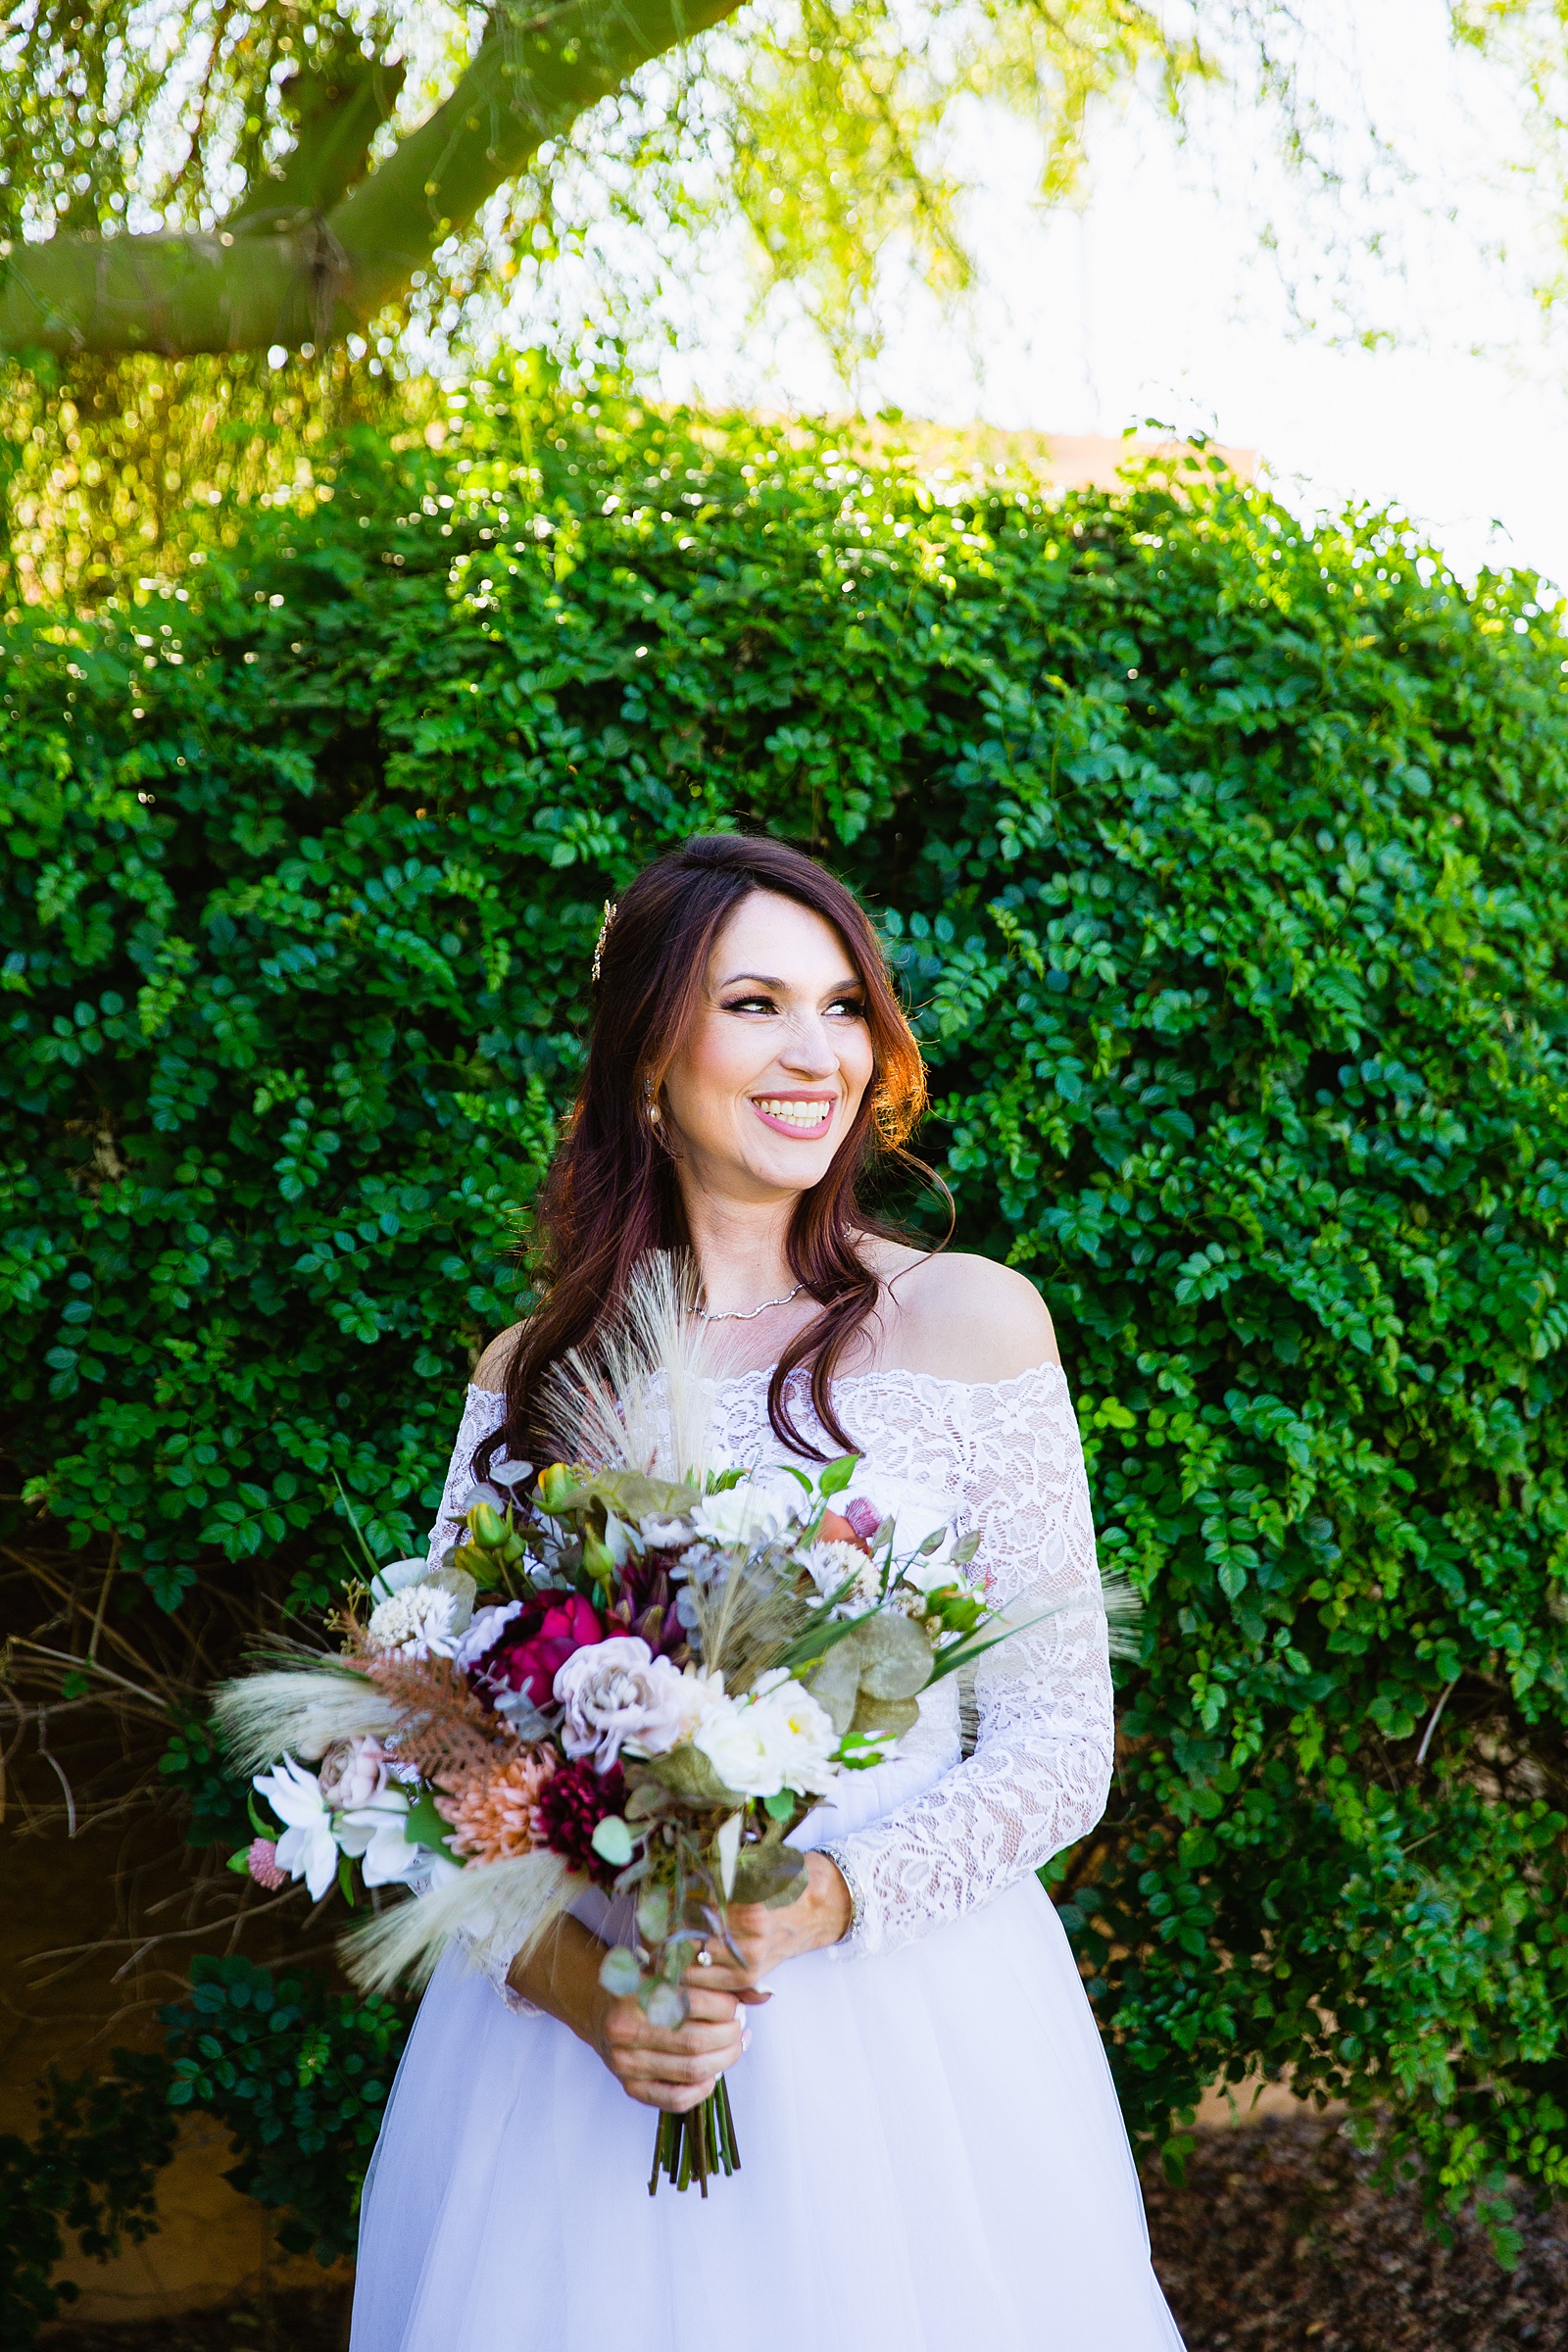 Bride's simple white lace wedding dress for her Backyard Micro wedding by PMA Photography.